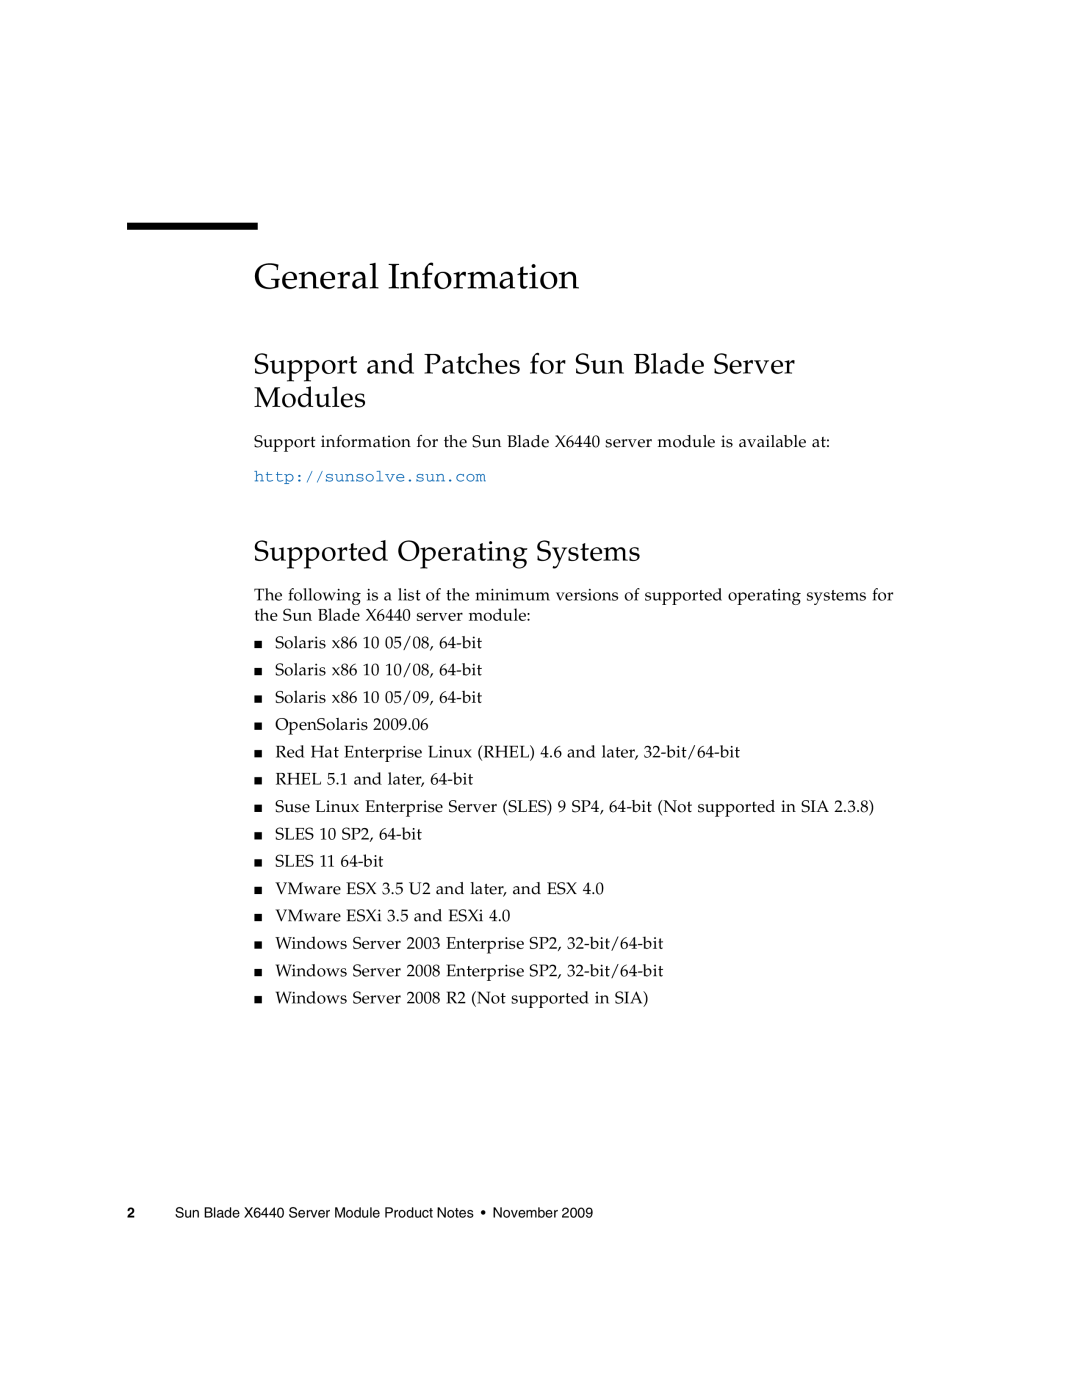 Sun Microsystems X6440 General Information, Support and Patches for Sun Blade Server Modules, Supported Operating Systems 